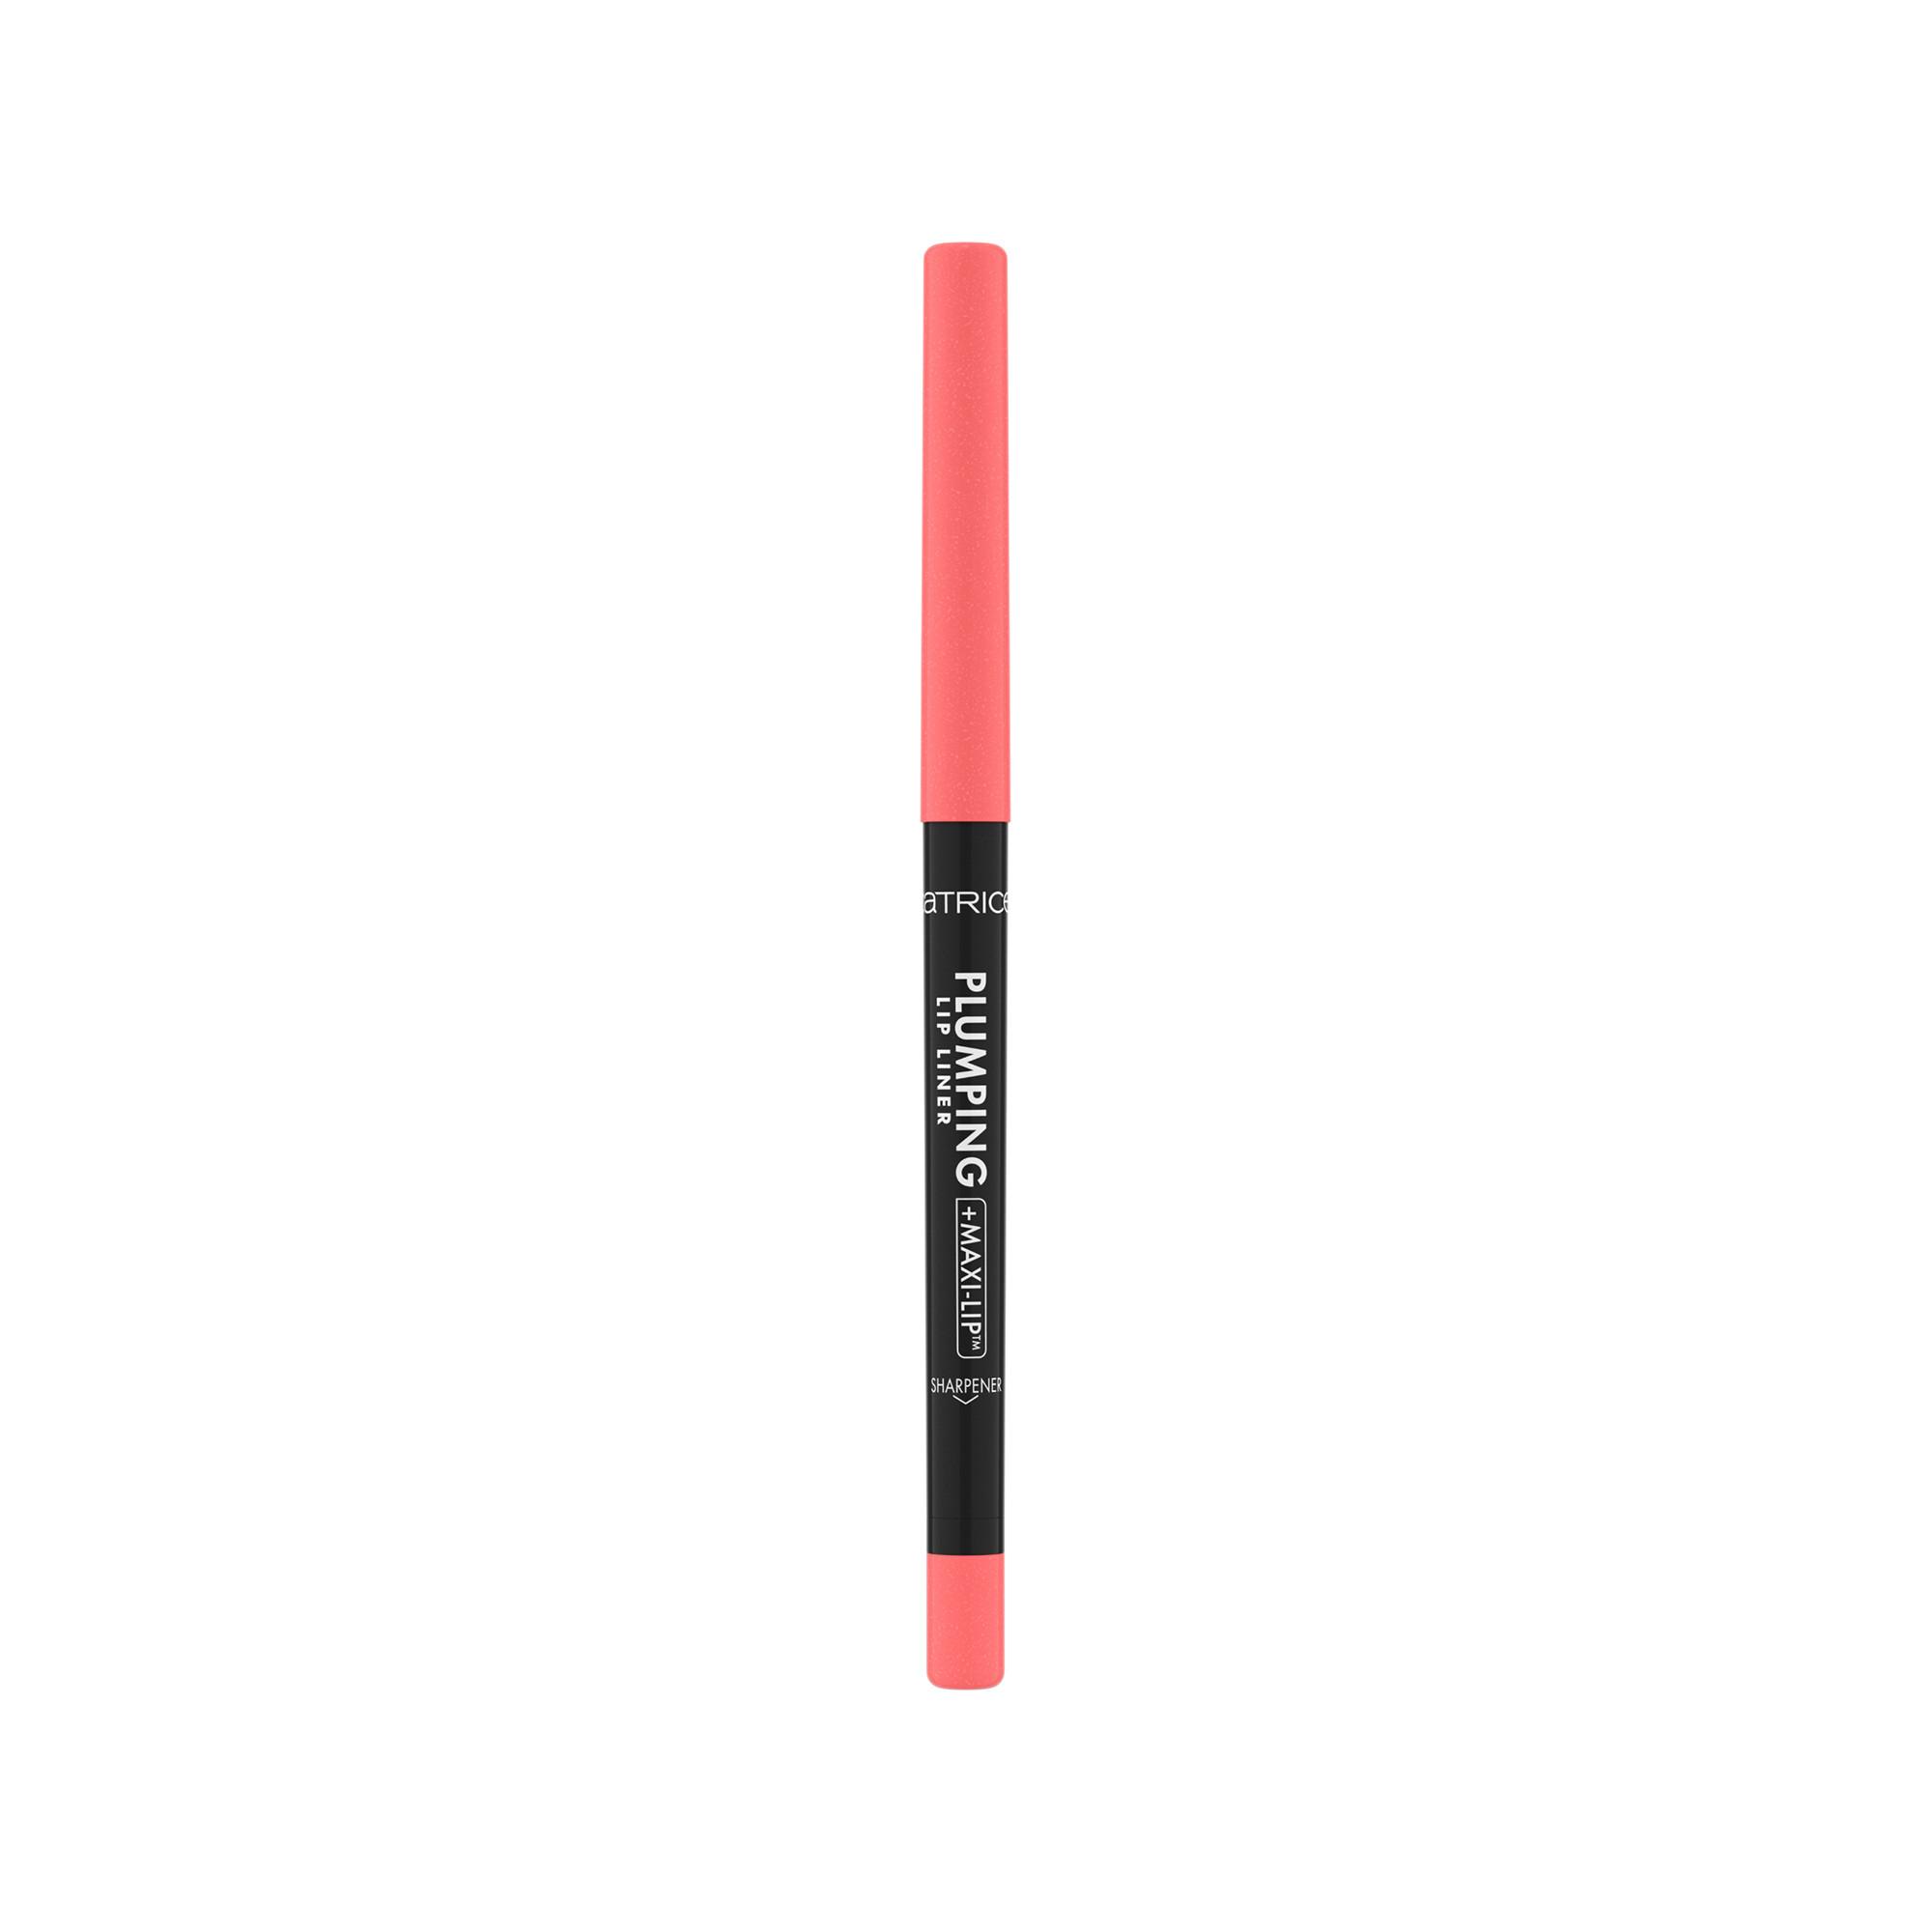 CATRICE Catrice Plumping Lip Liner 160 Catrice Plumping Lip Liner 160 